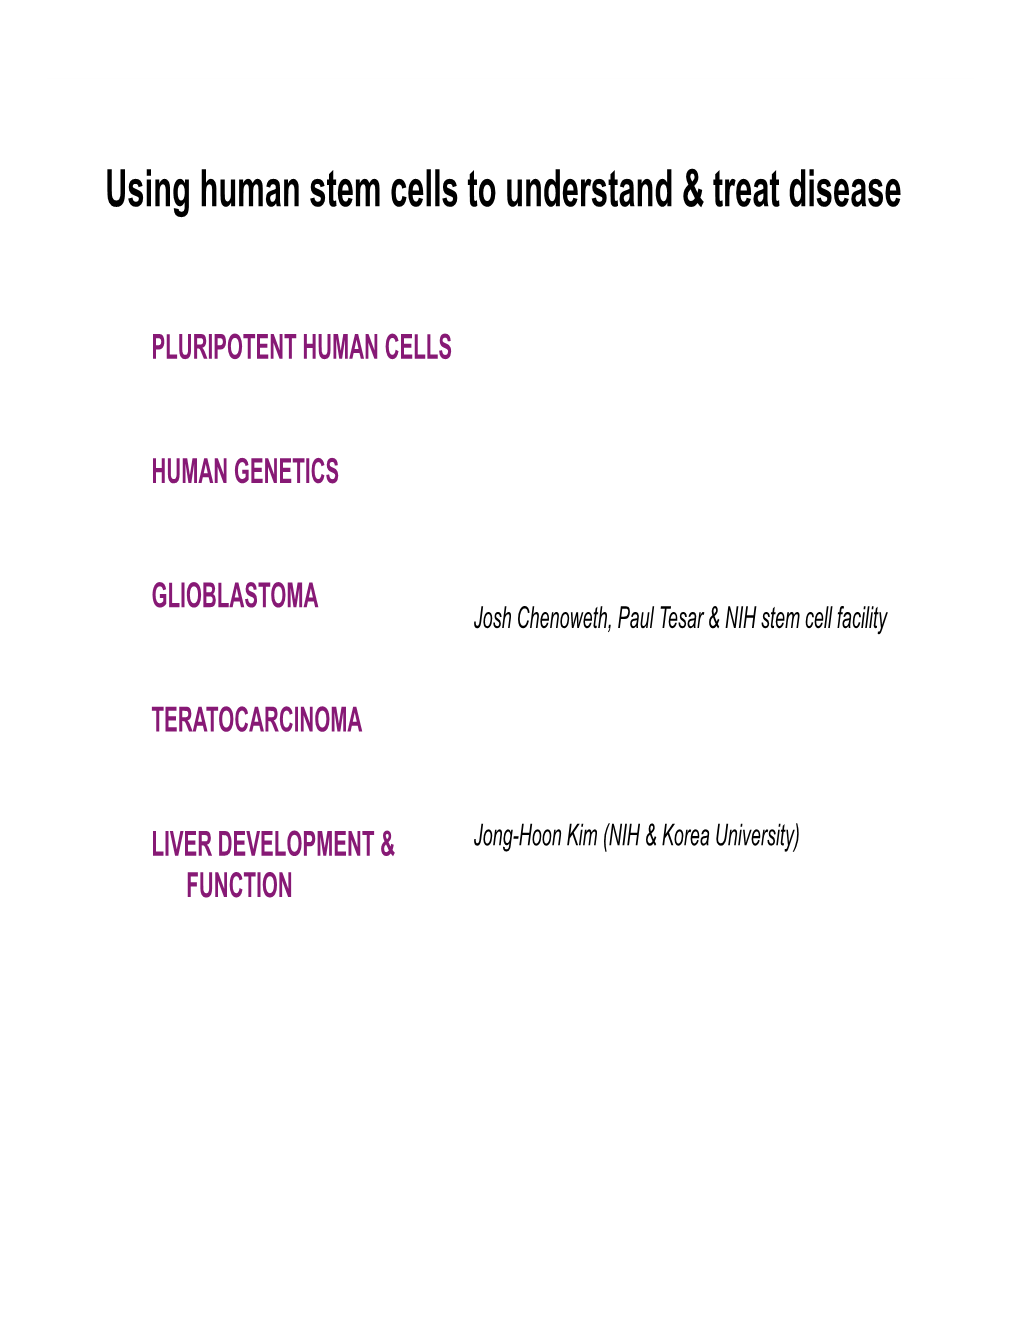 Using Human Stem Cells to Understand & Treat Disease